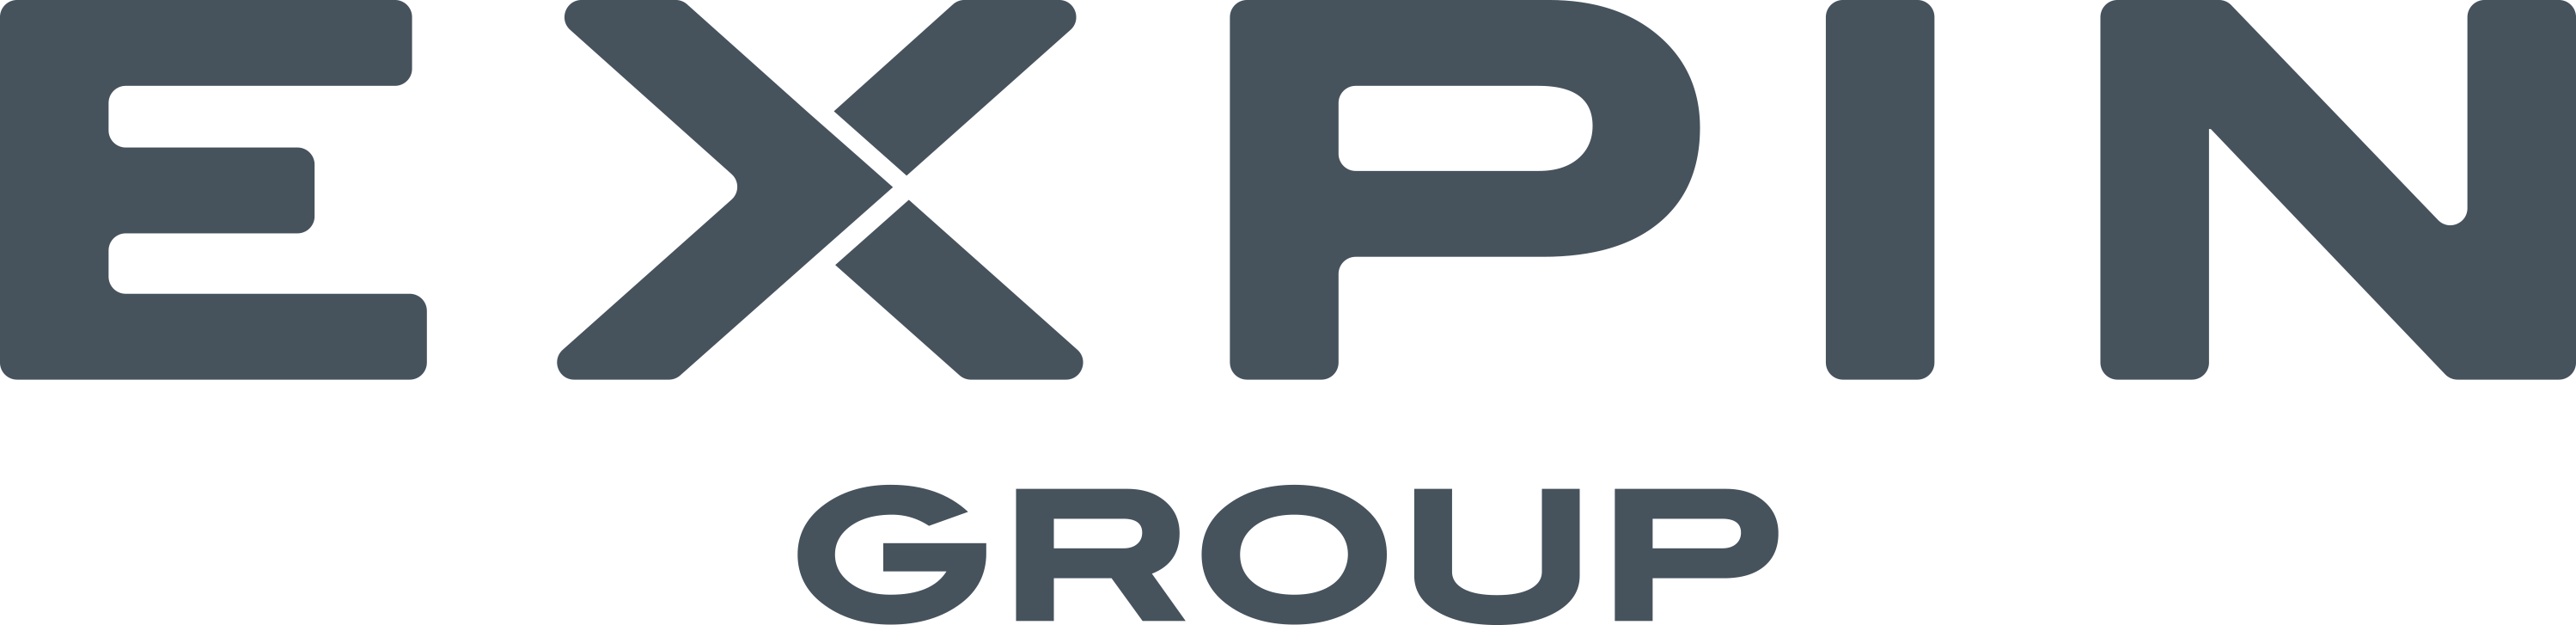 expin group.svg